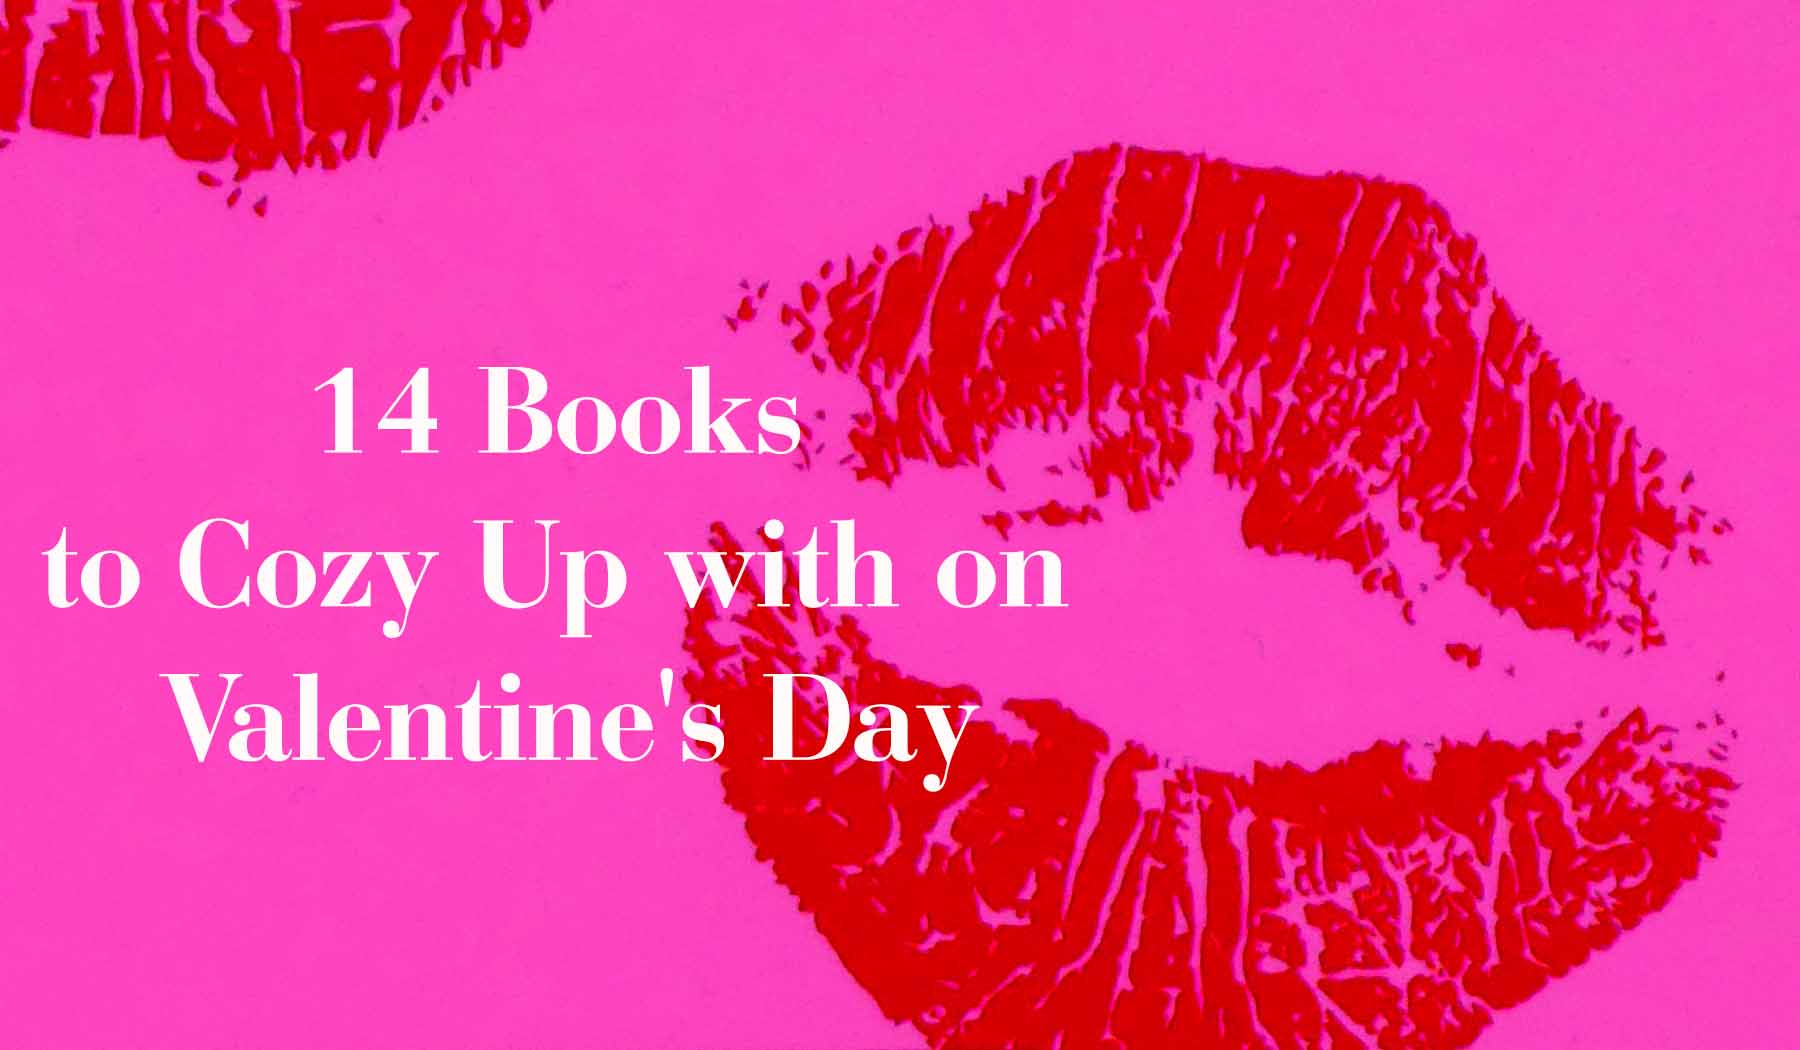 14 Books to Cozy Up with on Valentines Day